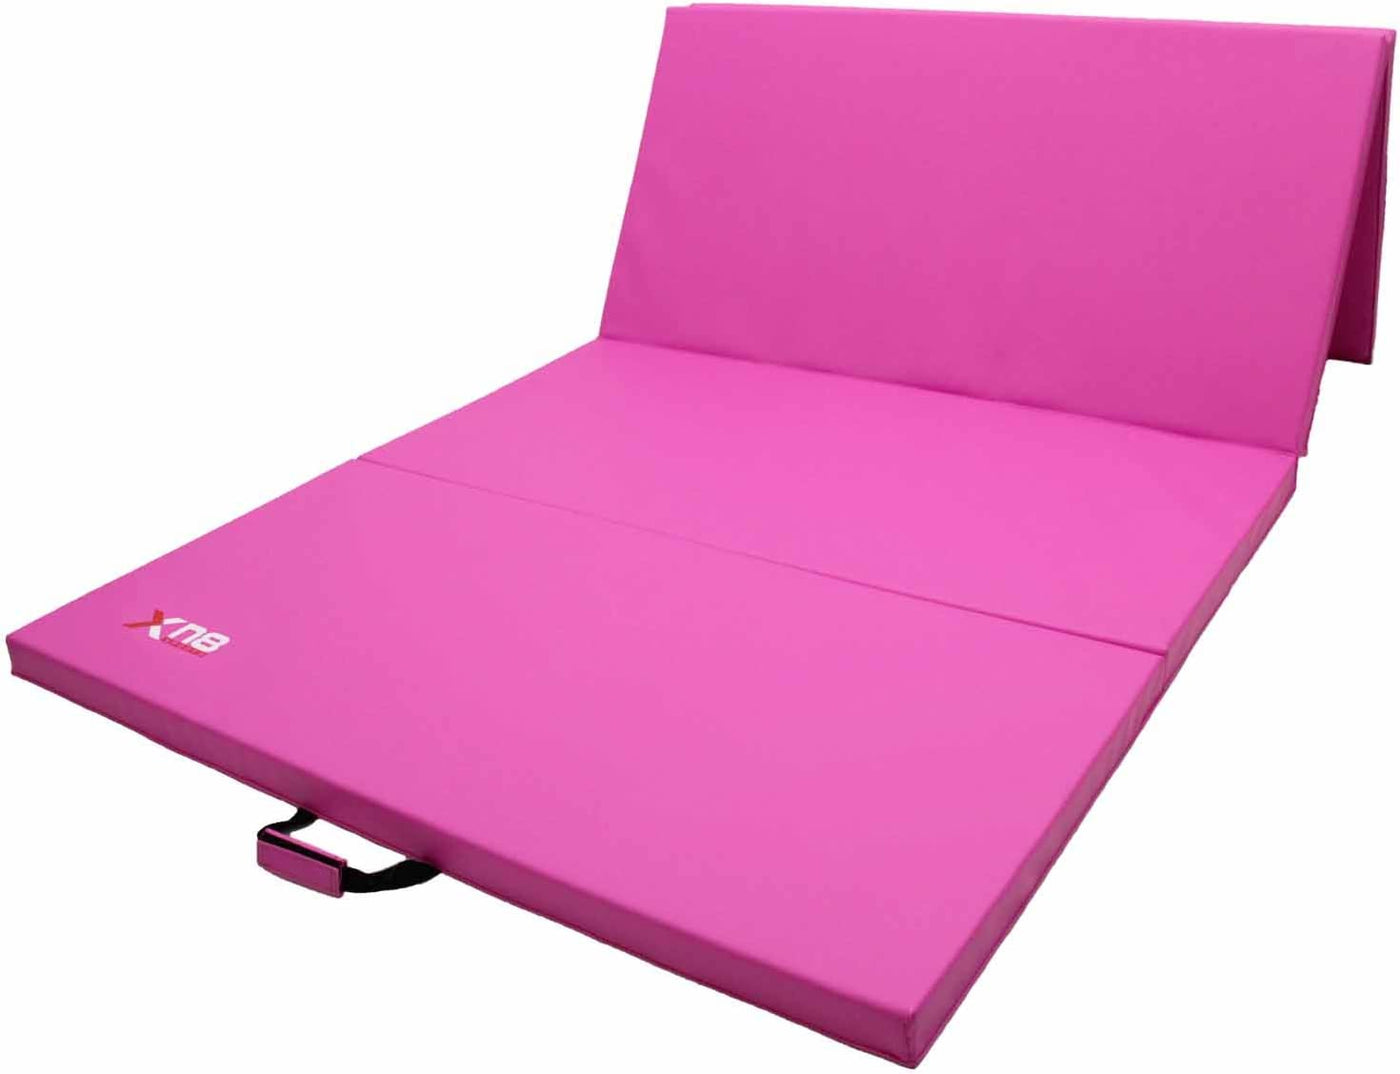 Xn8 Sports Gymnastic Mats Four Fold - Carry Handles Use for Crash Tumble Pilates, Workout, Gym, Home, Fitness